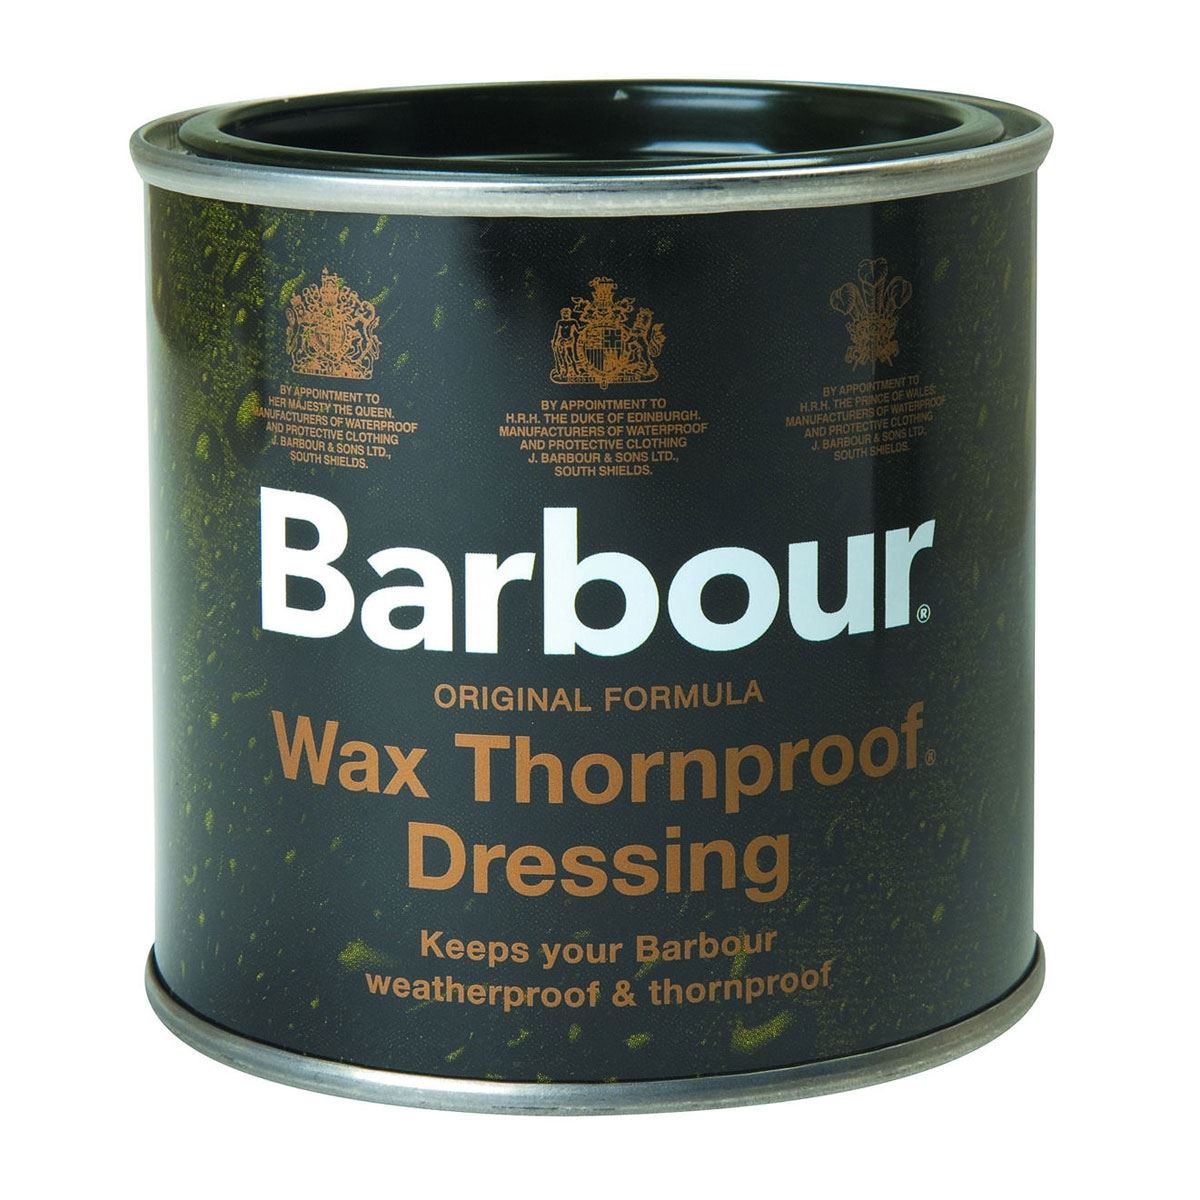 What are the Barbour Wax Thornproof Dressing details and its Ref. MPN?